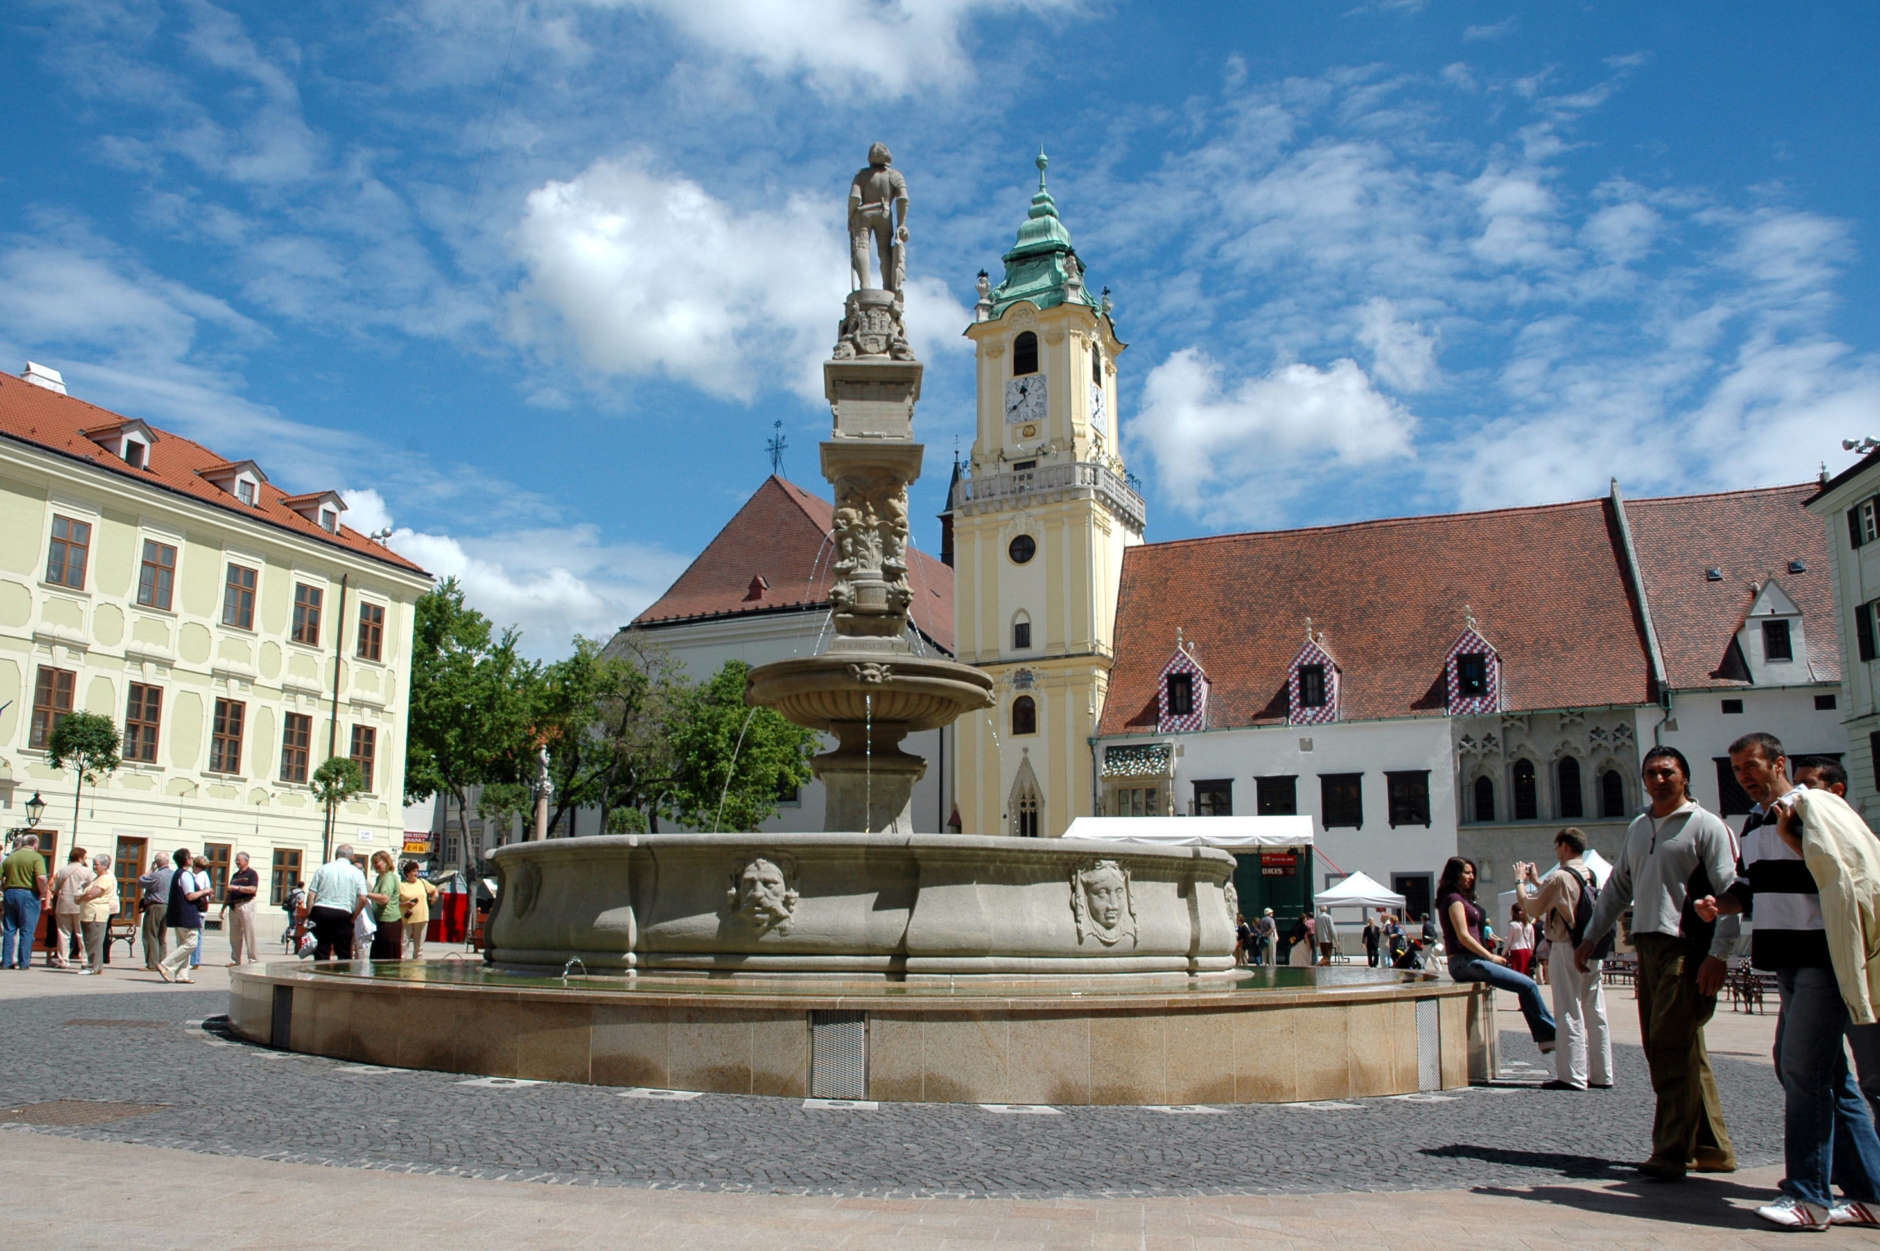 The Roland fountain and the Old Town Hall at Hlavni (main) Square in Bratislava, Slovakia, are seen on May 20, 2006. The Old Town district is the city's jewel, with cobblestone squares, narrow, labyrinthine streets and a castle offering sweeping views of the city and the Danube River. (AP Photo/Jan Koller, CTK)